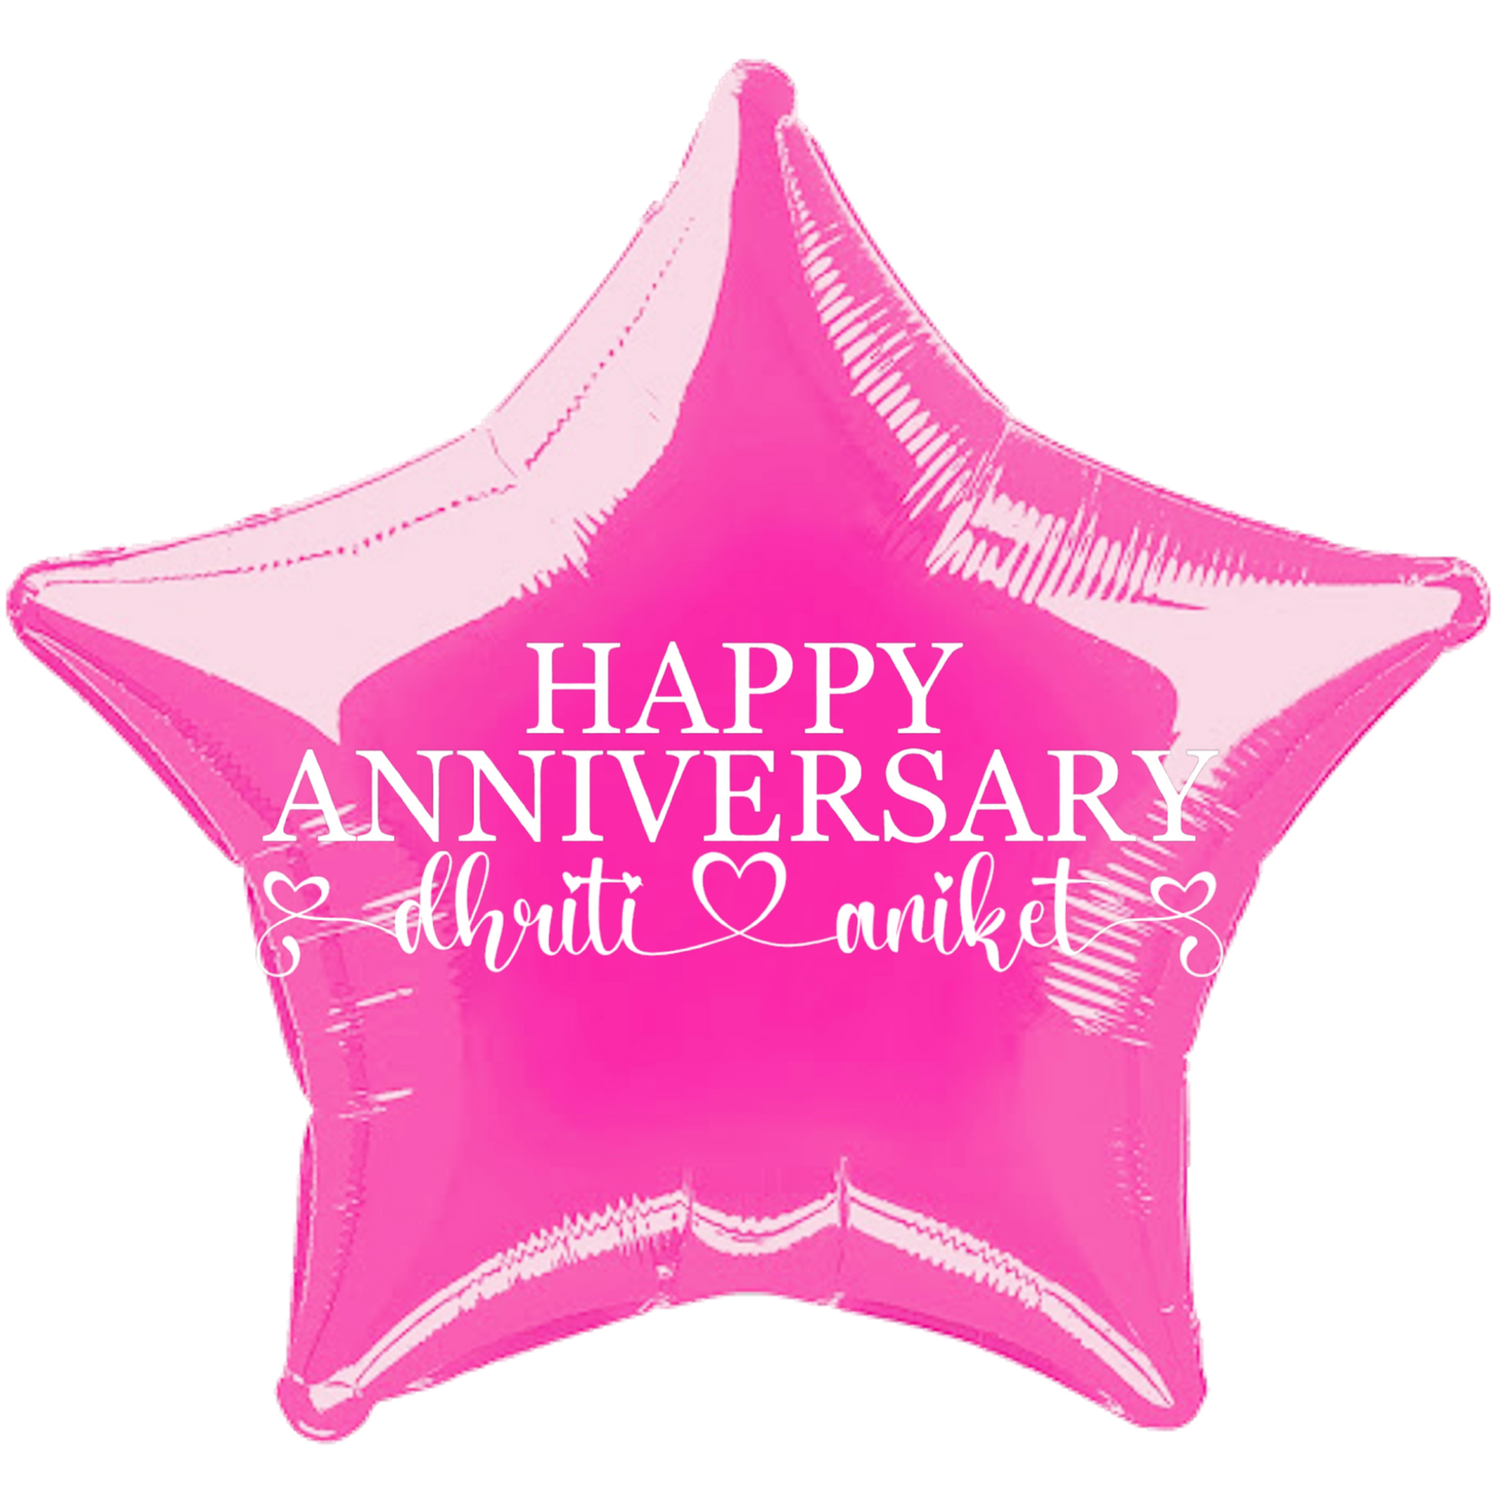 Custom Name/Text/Message Hot Pink Star Balloons For First Wedding Anniversary, 2nd/3rd/5th/10th/15th/20th/25th/30th/35th/40th/45th/50th/55th/60th/65th/75th Marriage Anniversary And Wedding Milestones. Supports Helium/Air, Luxury Bespoke Balloons Make Perfect Decoration Supplies & Surprise For Your Husband/Wife/Partner/Other-Half.